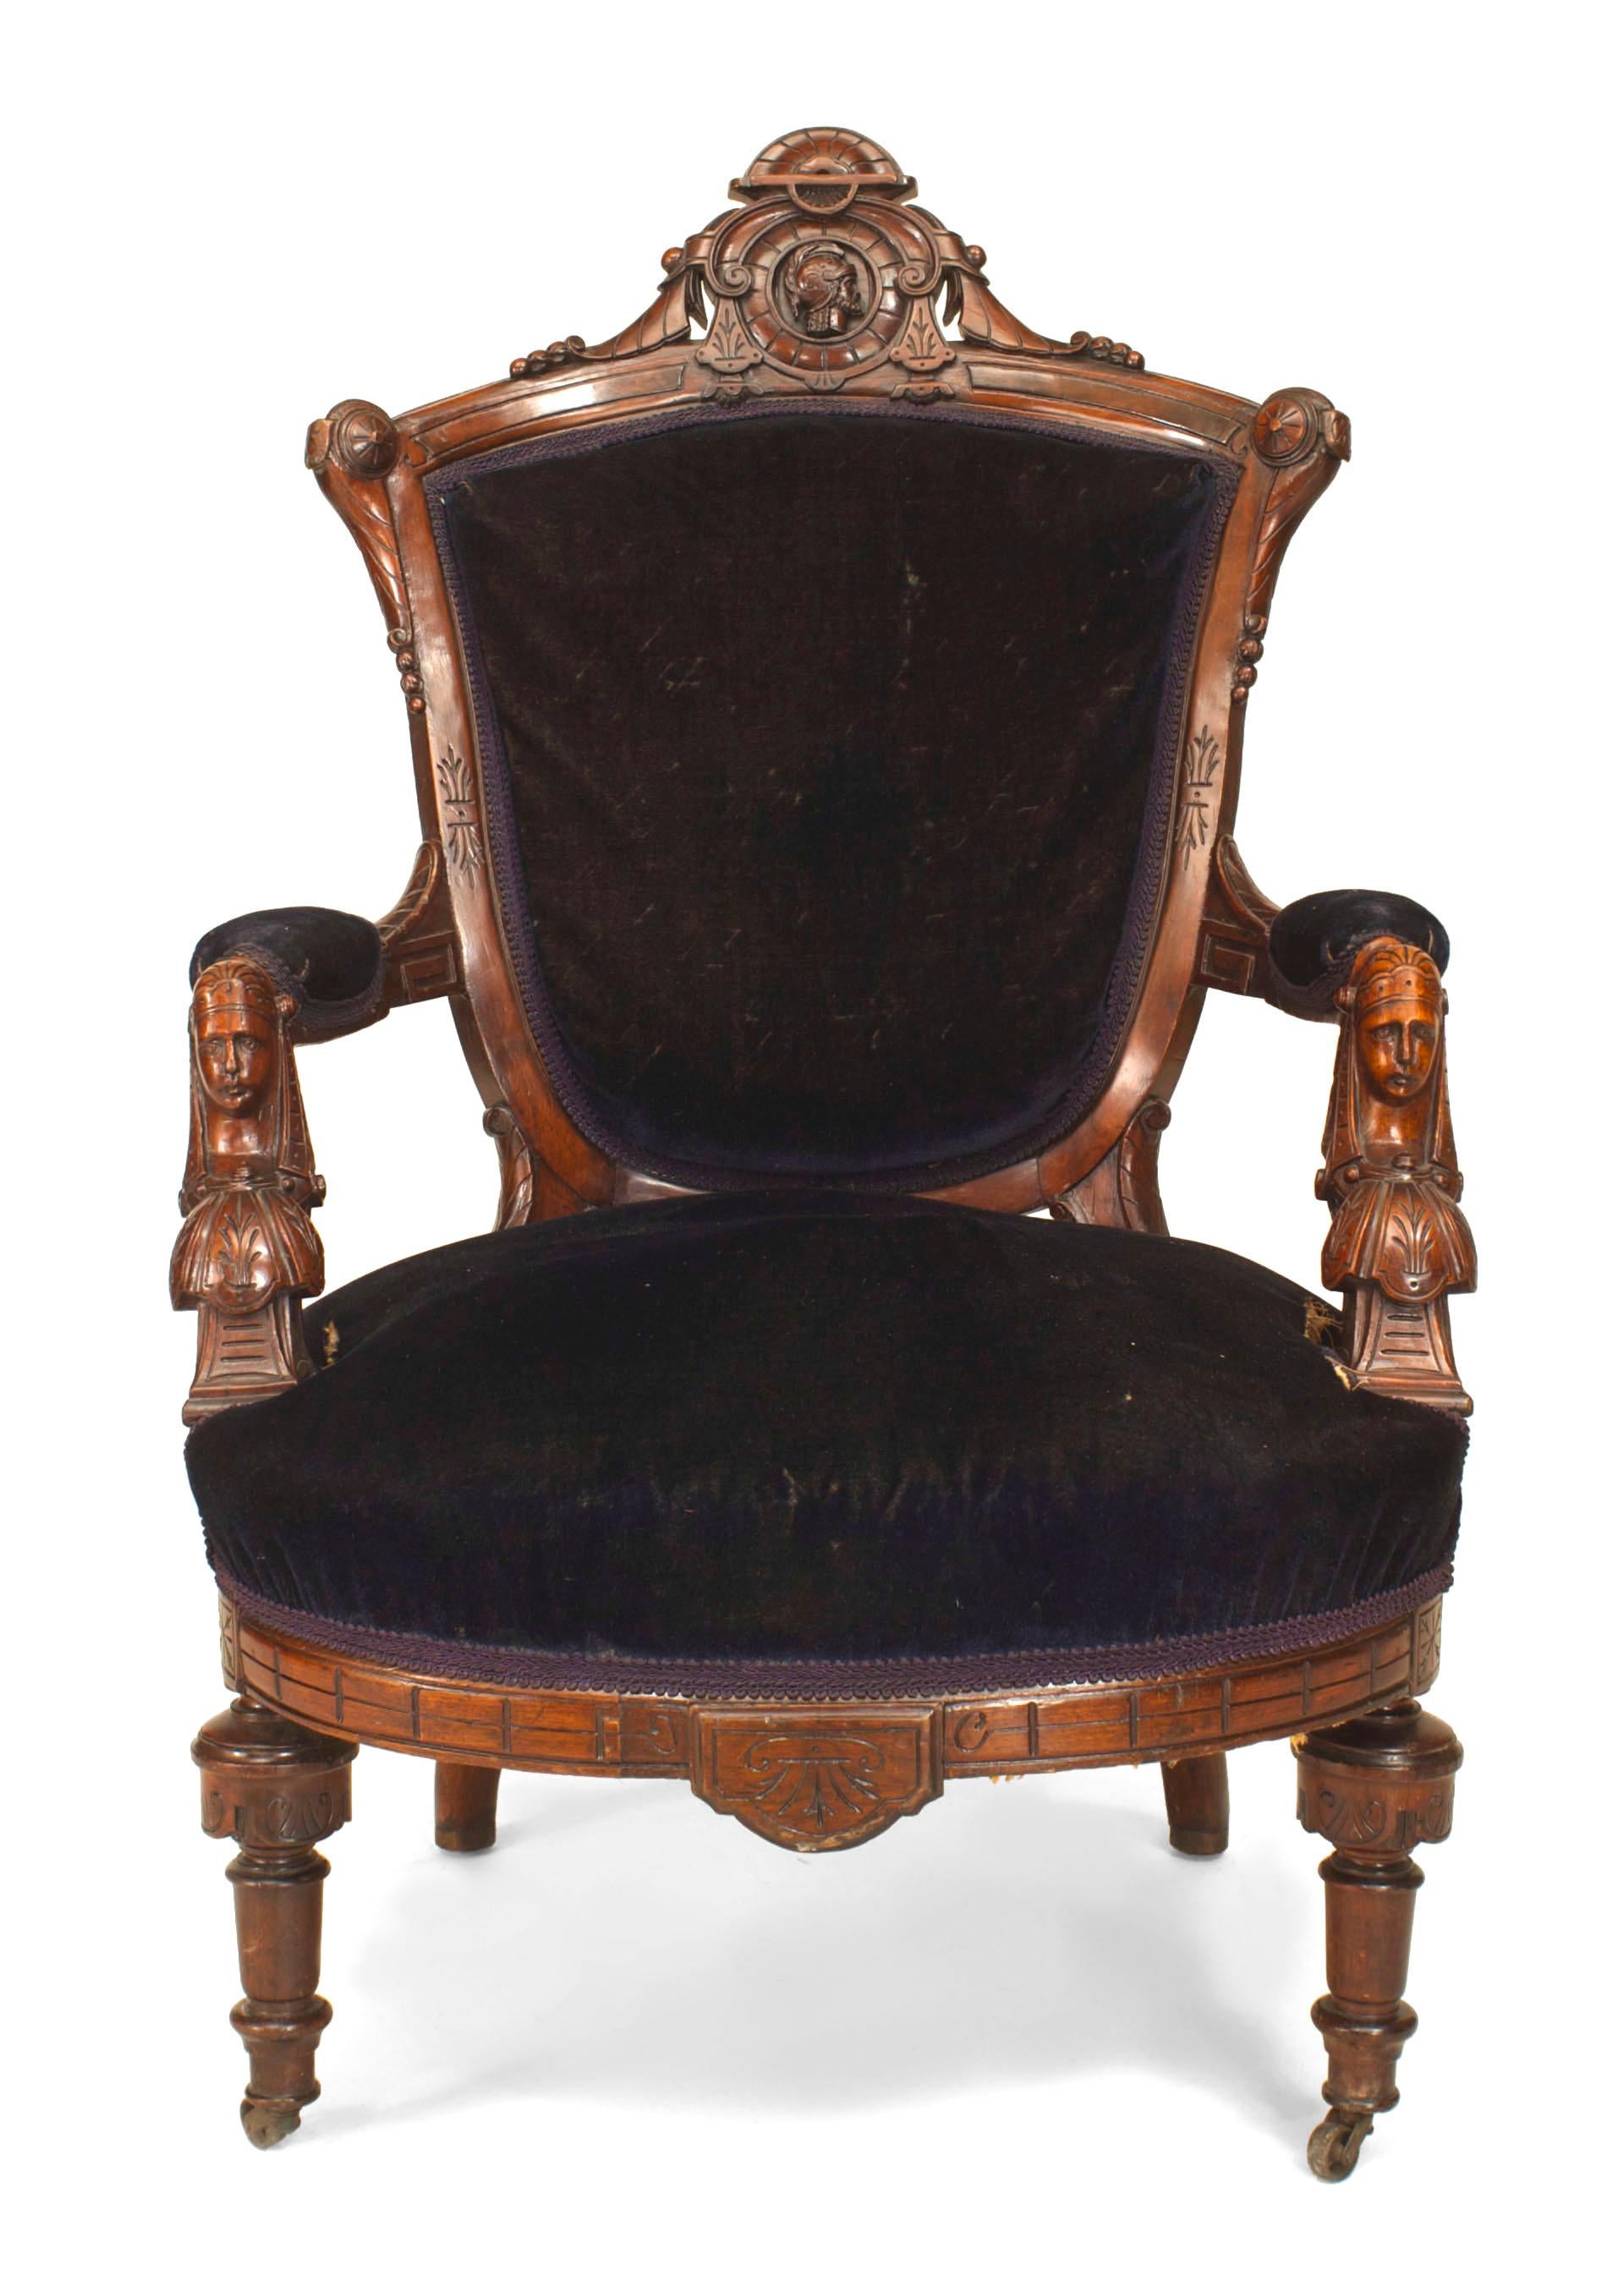 American Victorian Eastlake-style (Renaissance Revival) walnut arm chair with carved heads and blue velvet upholstery. (Attributed to JOHN JELLIFF & CO)
